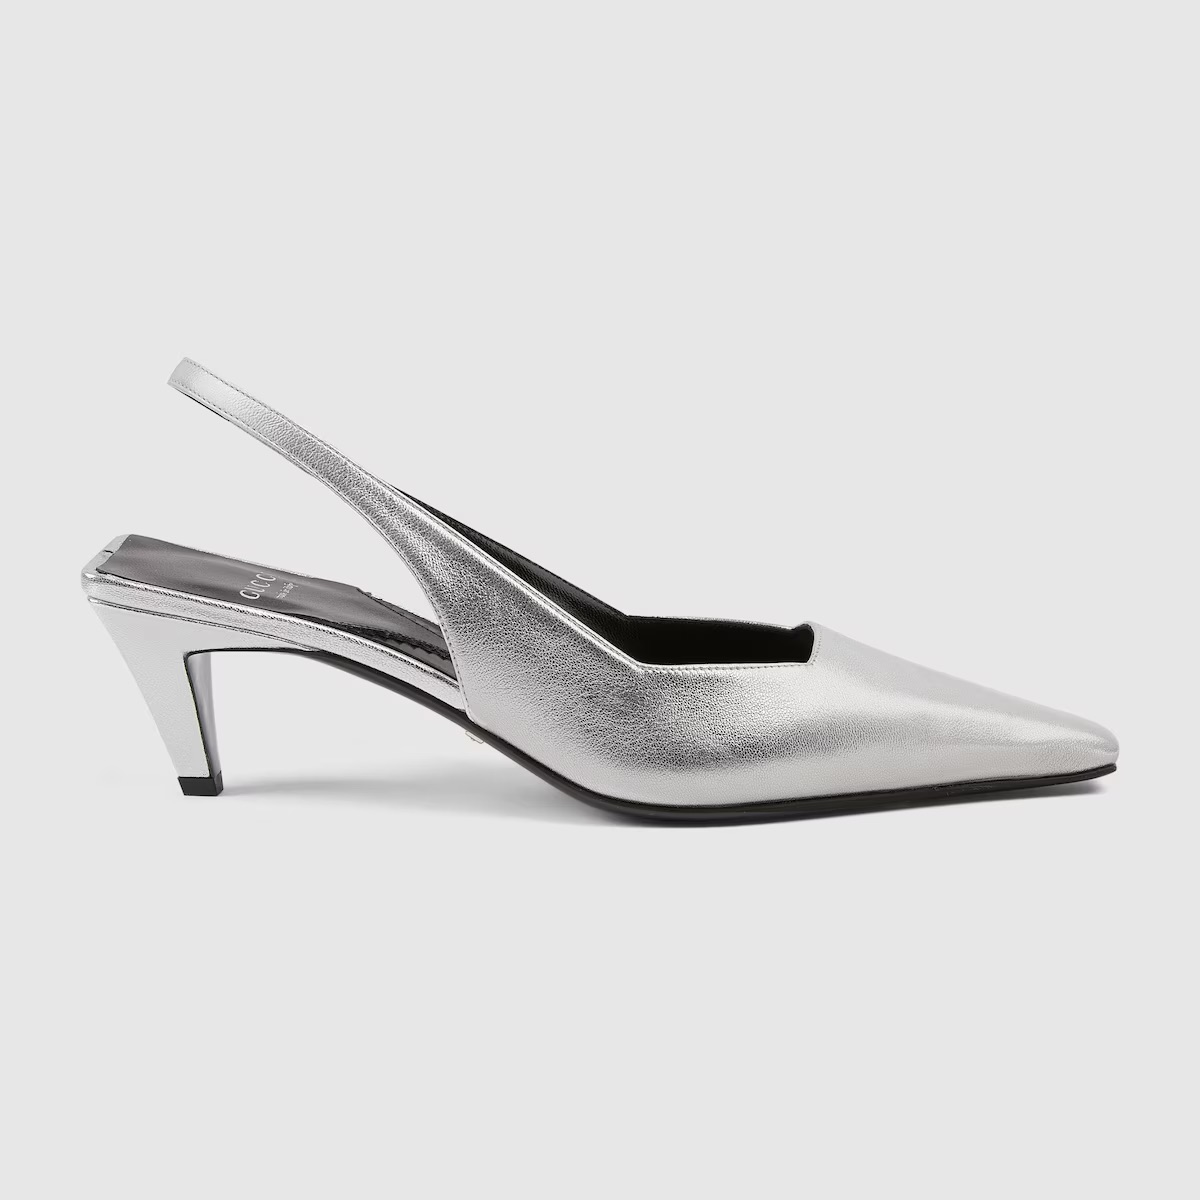 Gucci's Crystal Slingback Shoes Are Big News This Season | Who What Wear UK